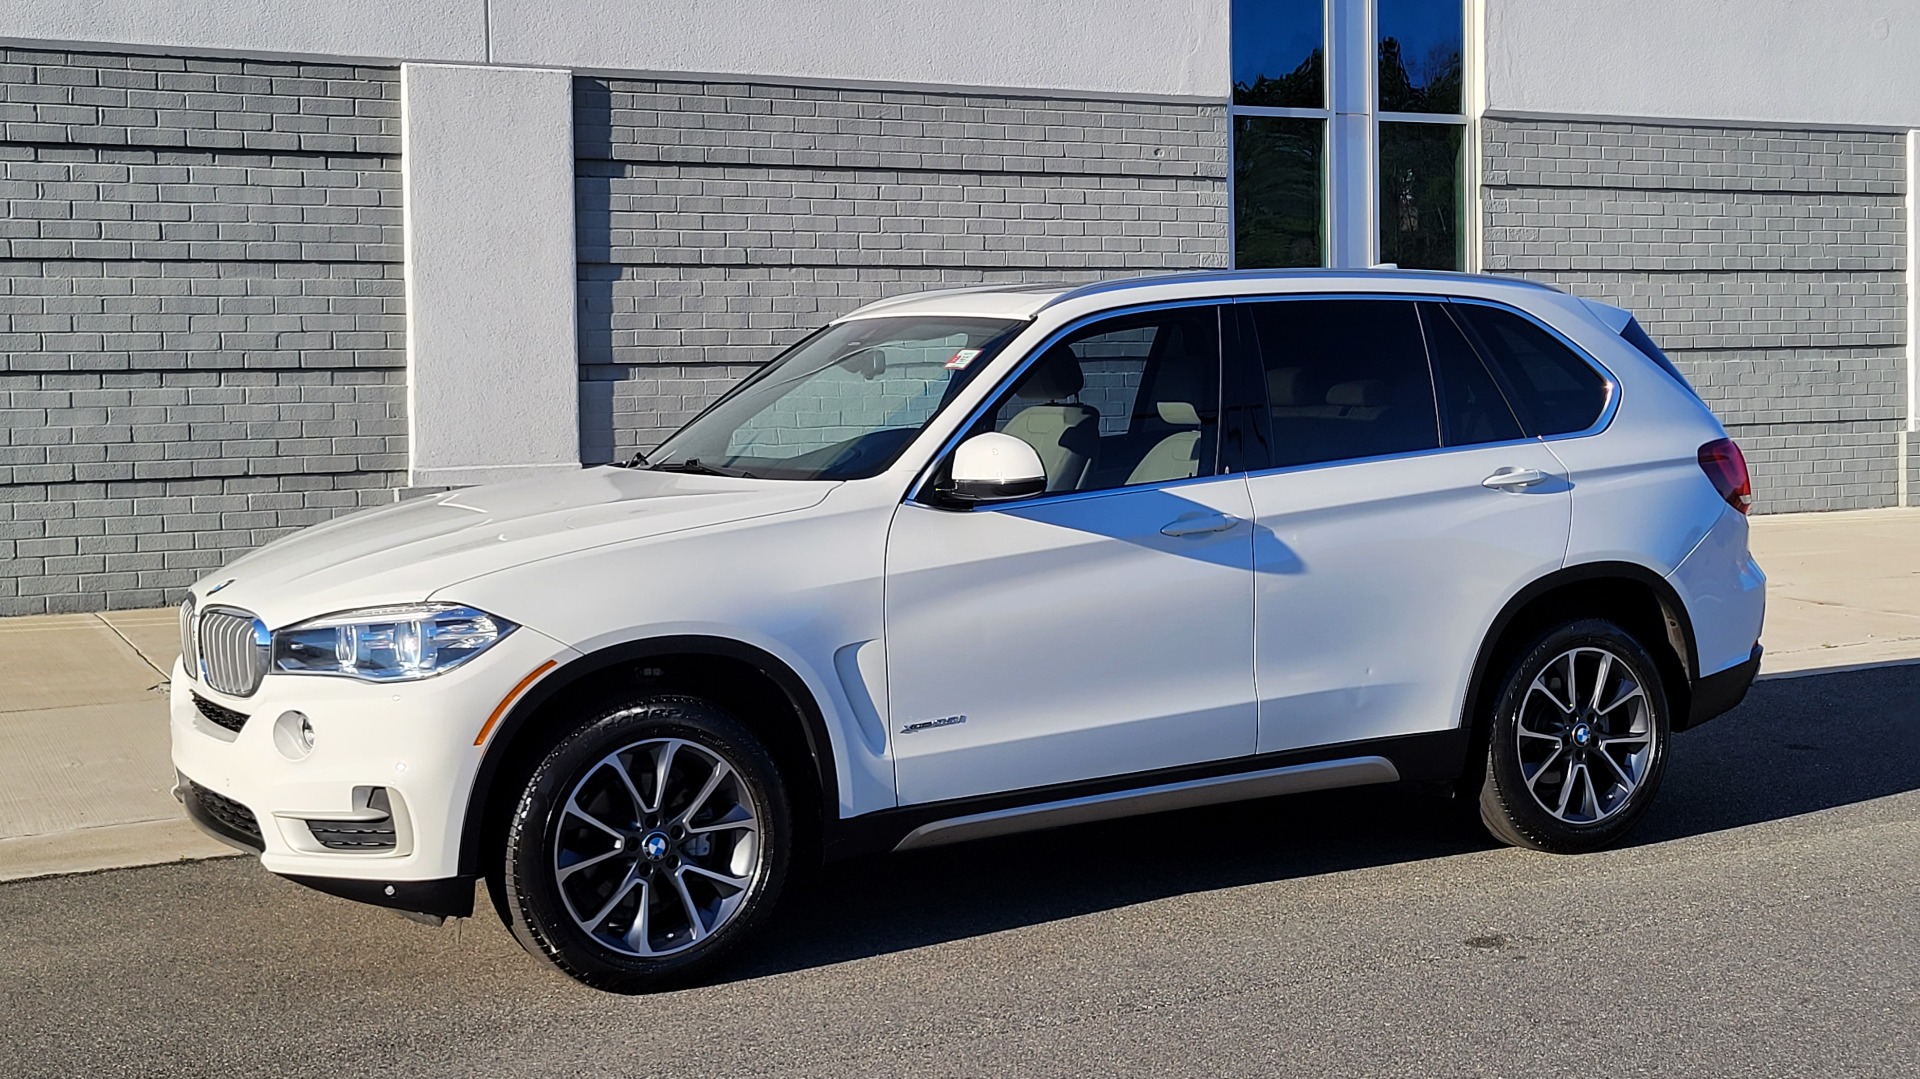 Used 2018 BMW X5 XDRIVE35I PREMIUM / DRVR ASST / HUD / WIRELESS CHARGING / HEATED SEATS for sale $41,995 at Formula Imports in Charlotte NC 28227 3